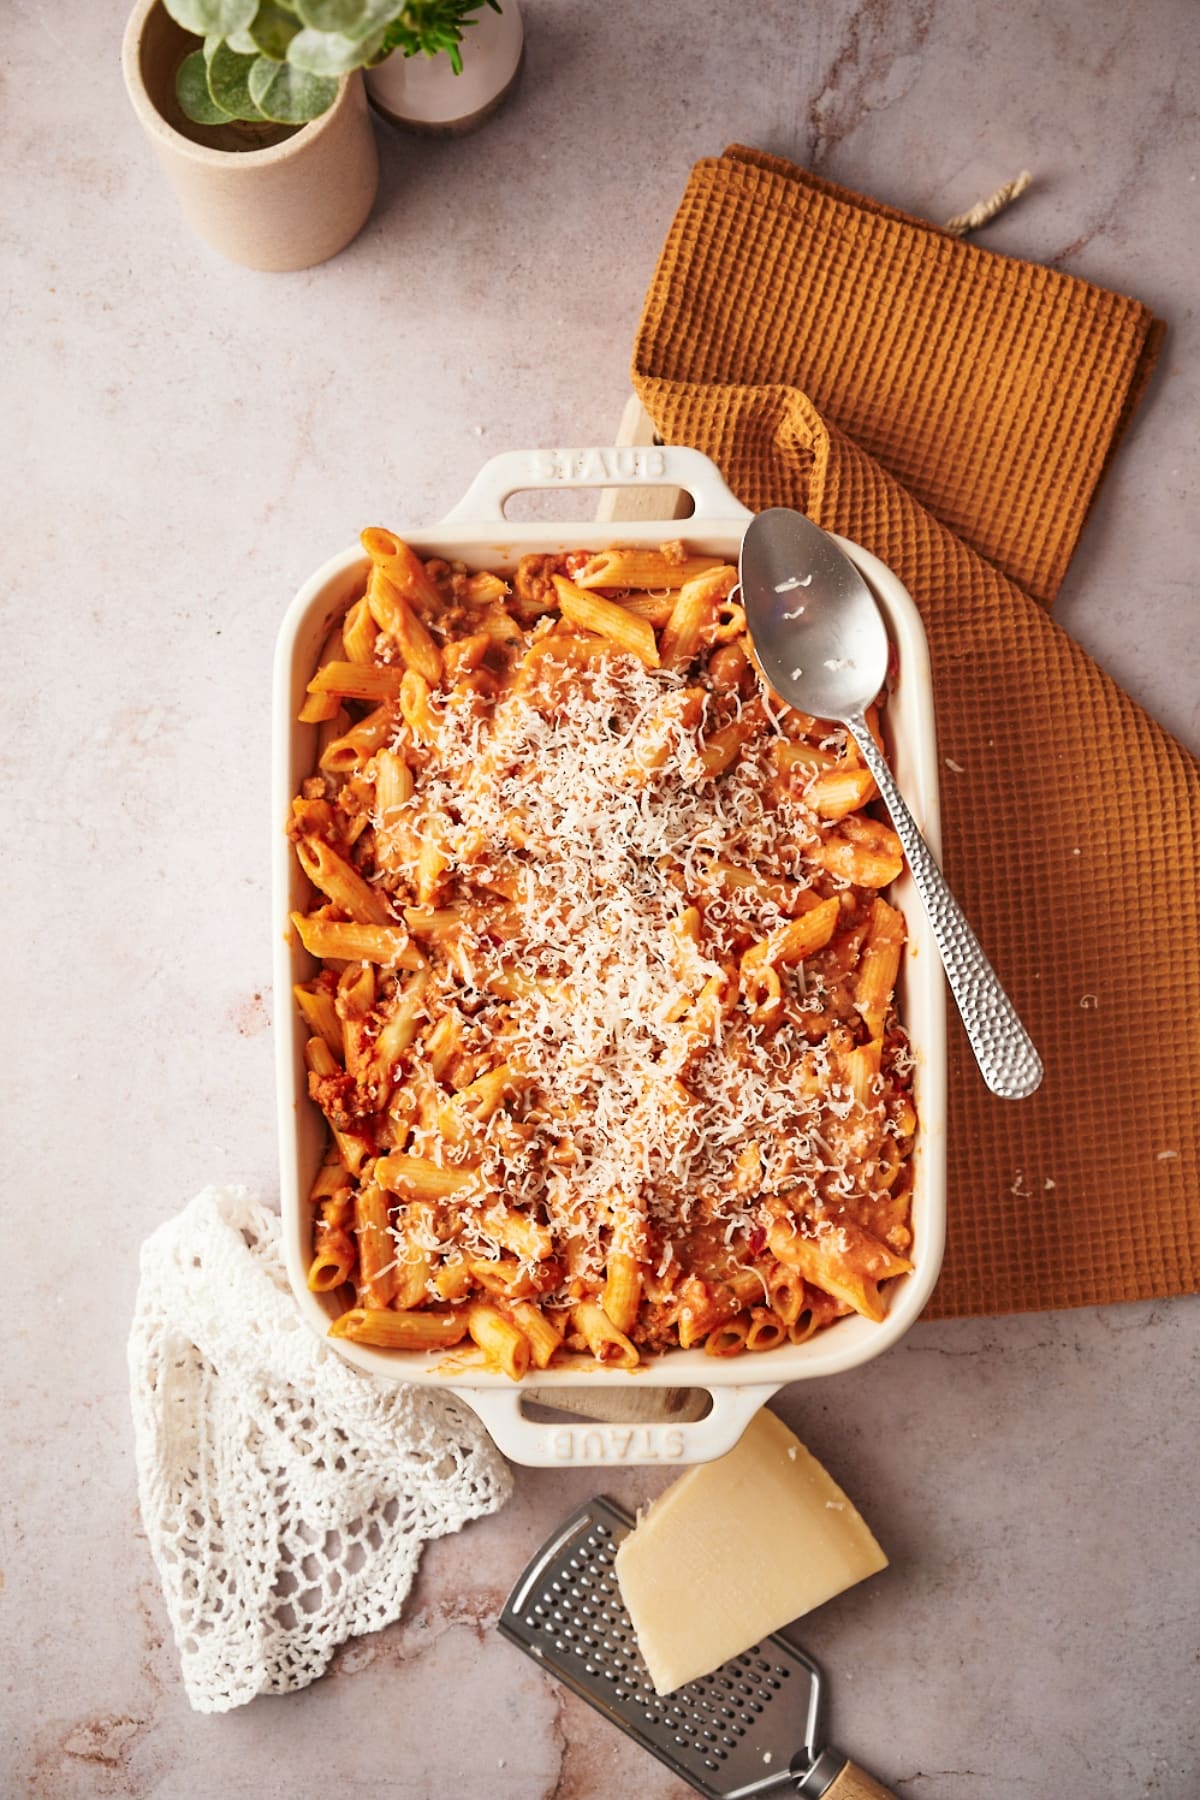 baked penne in a white casserole dish with a spoon on it. an orange table napkin, white lace and cheese and grater around the dish.